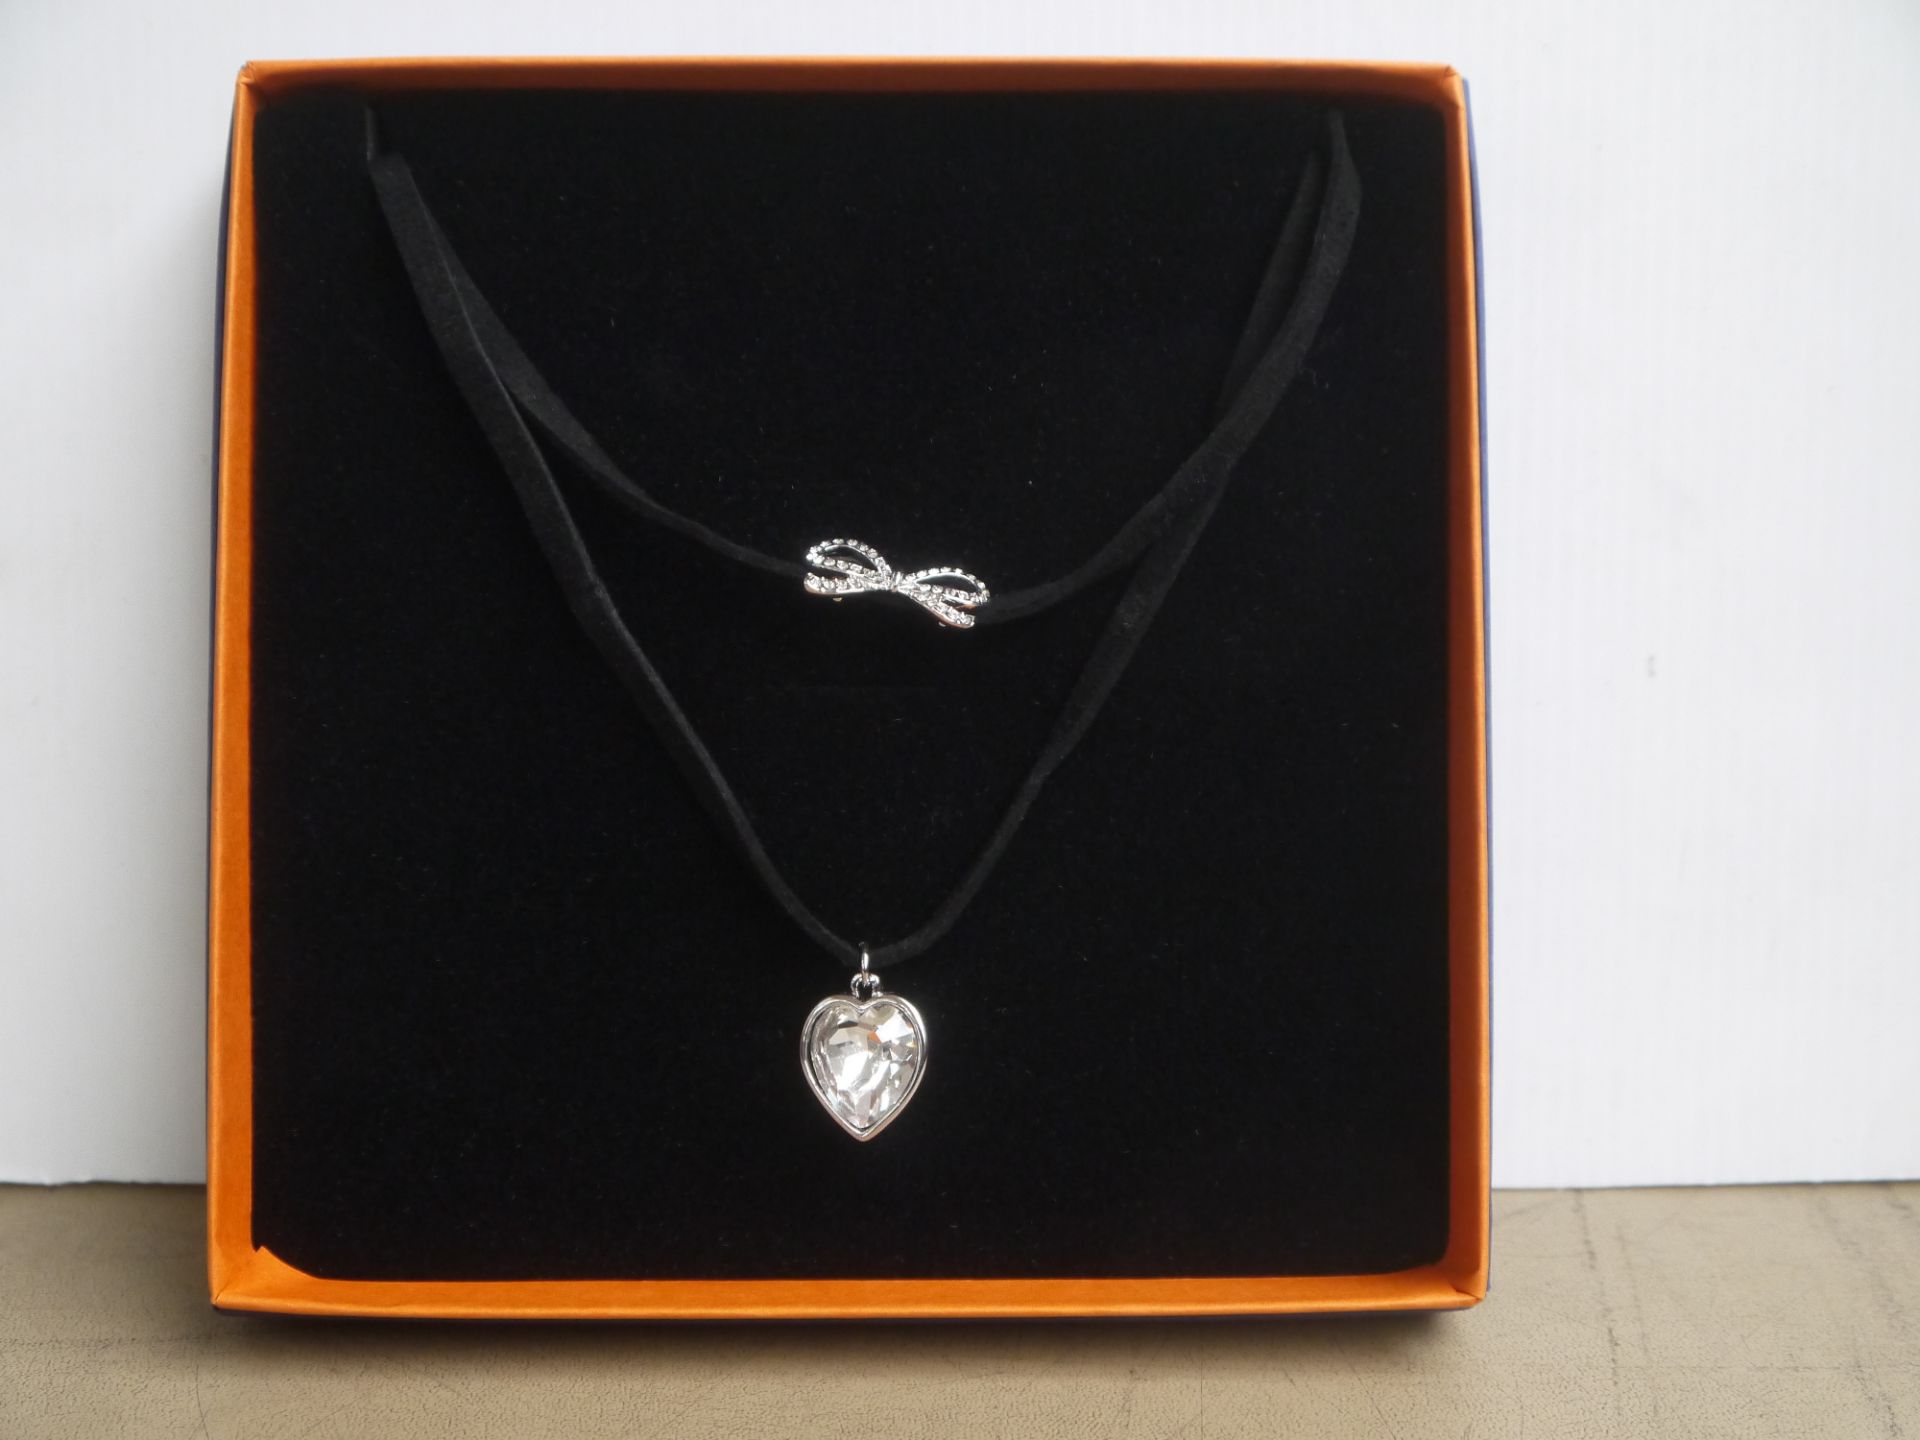 Cornelius Collection Crystal heart and Bow necklace in presentation case